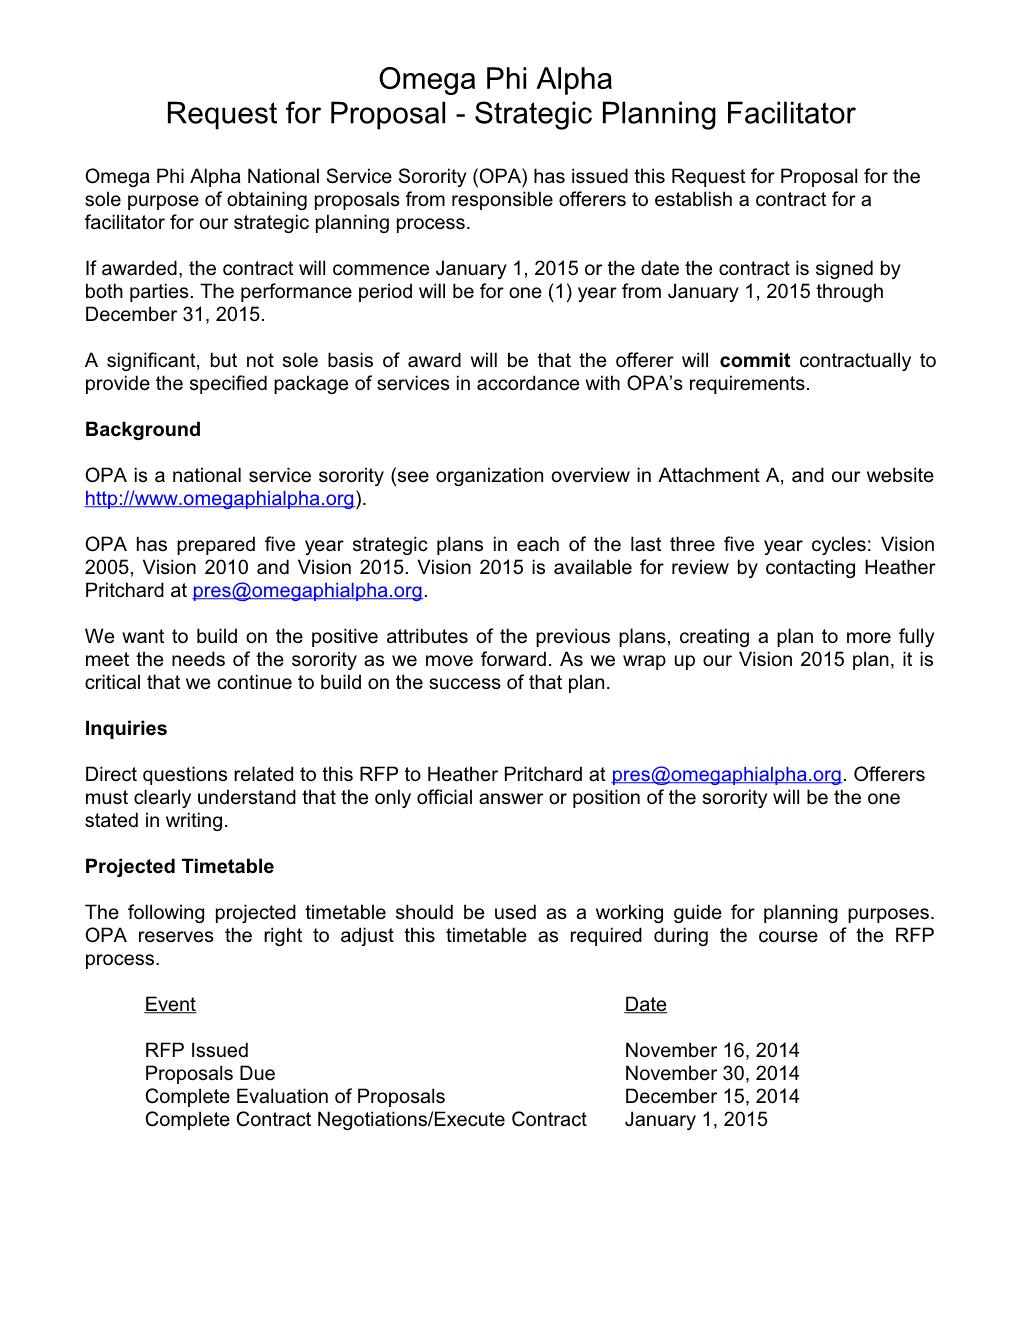 Omega Phi Alpha, National Service Sorority (OPA) Has Issued This Request for Proposal For